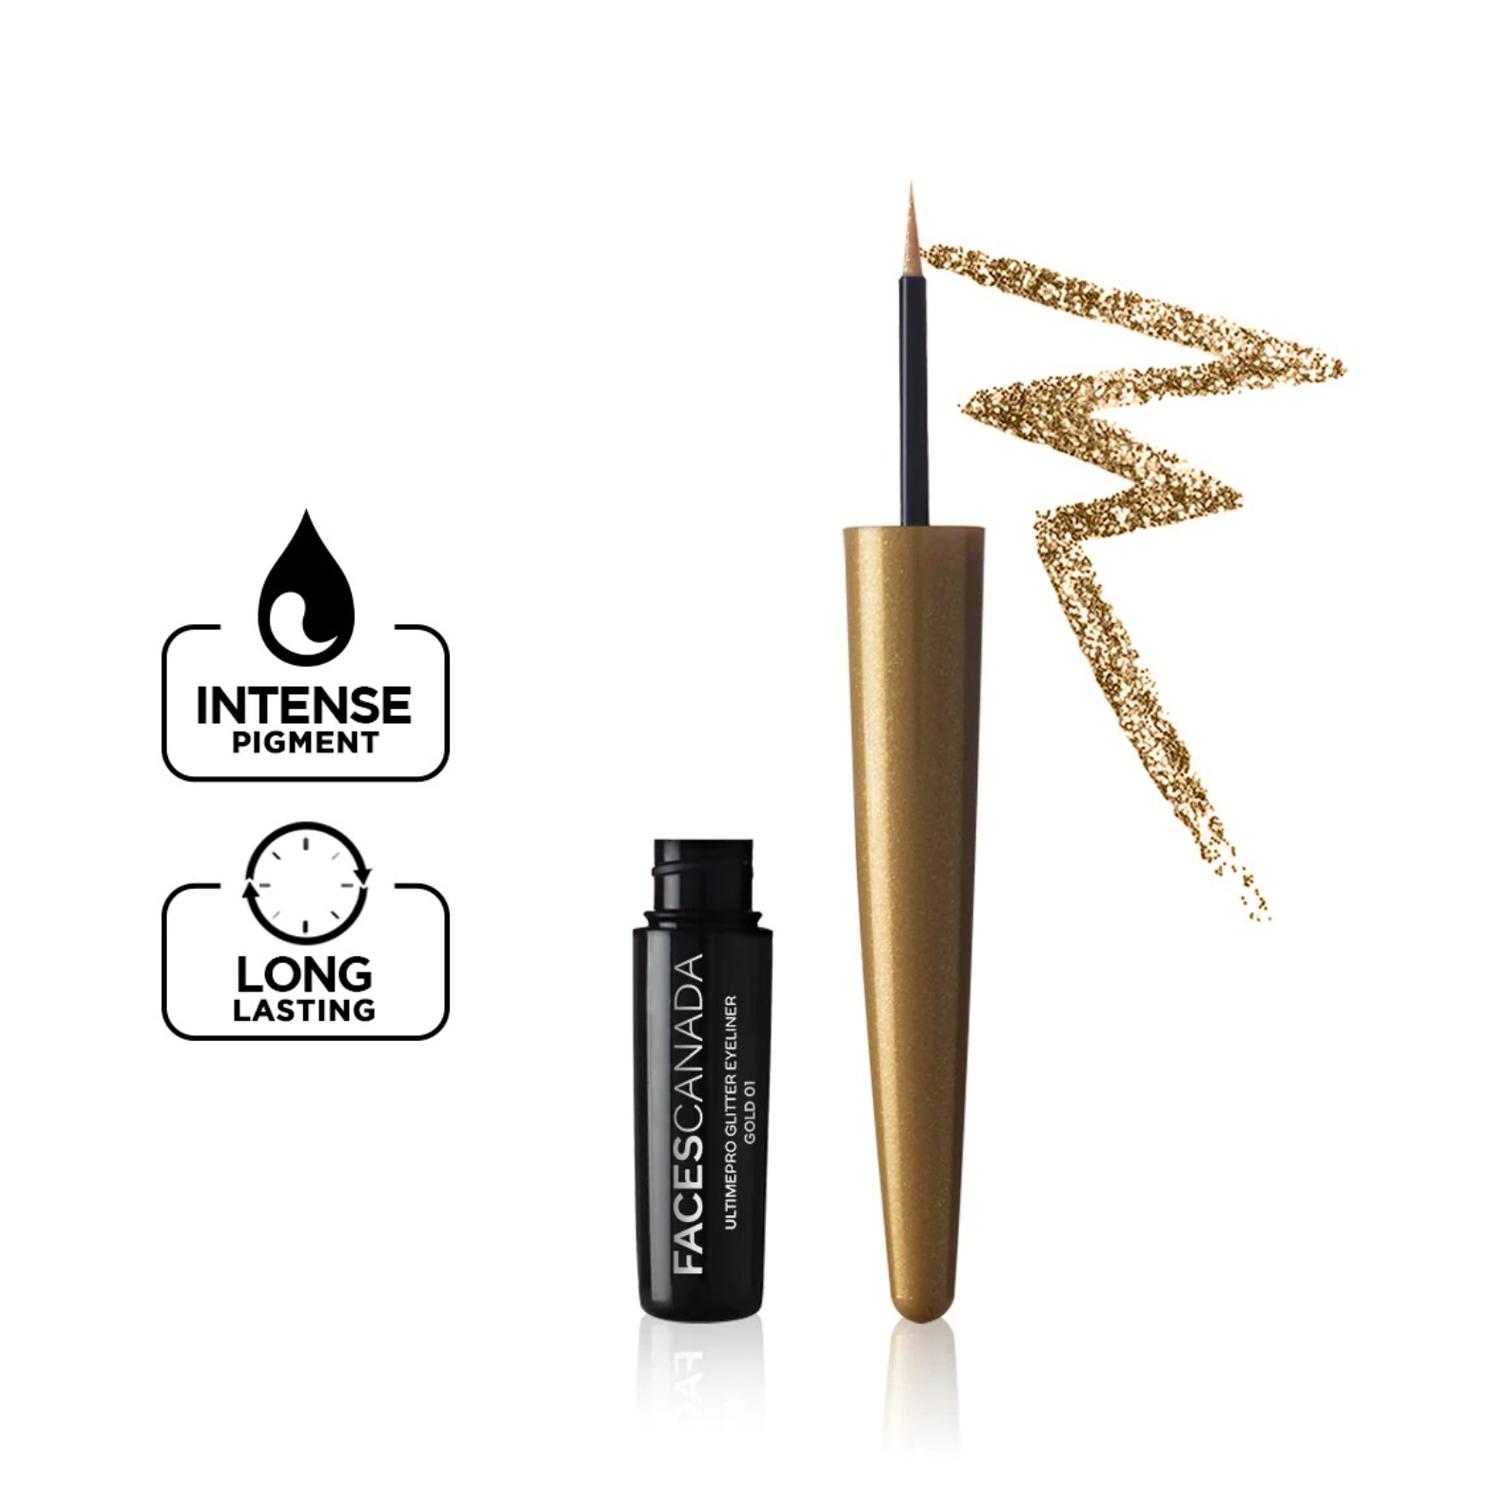 Faces Canada | Faces Canada Ultime Pro Glitter Eyeliner - Gold 01, Shimmery Finish, Long-Lasting (1.7 ml)